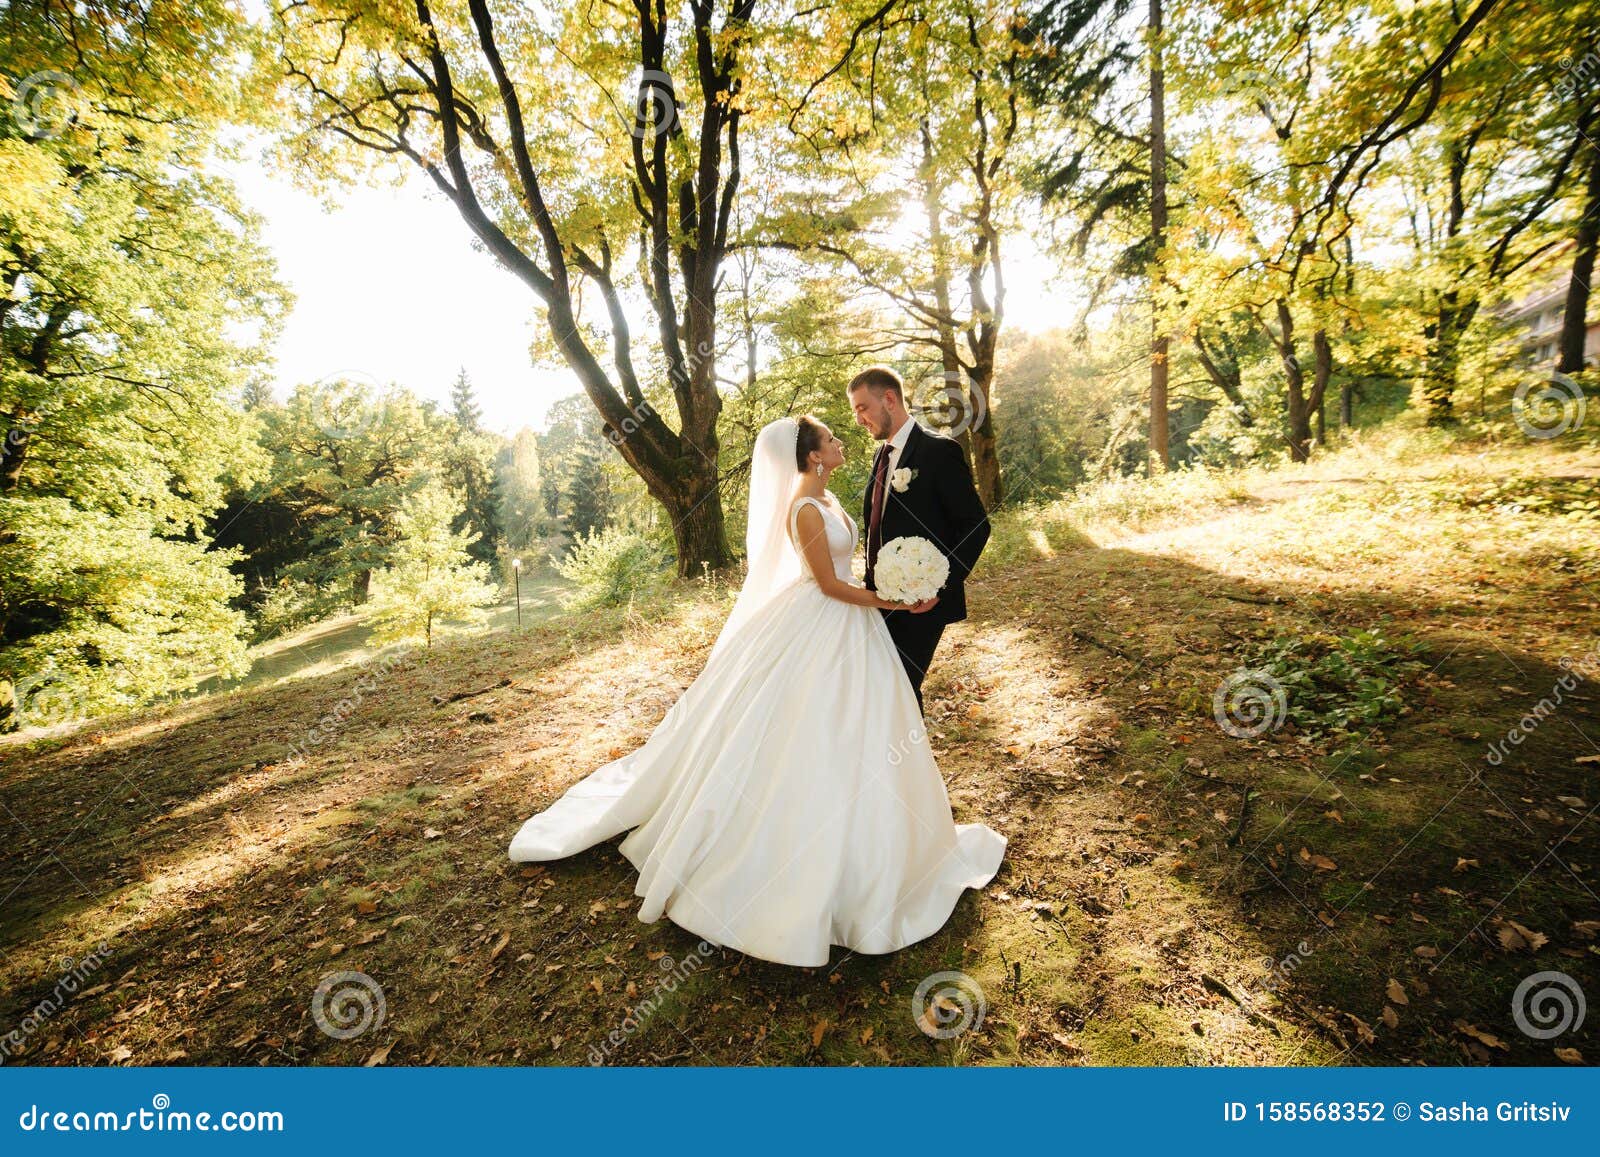 Young Bride With Groom Walking In The Forest Woman With Long